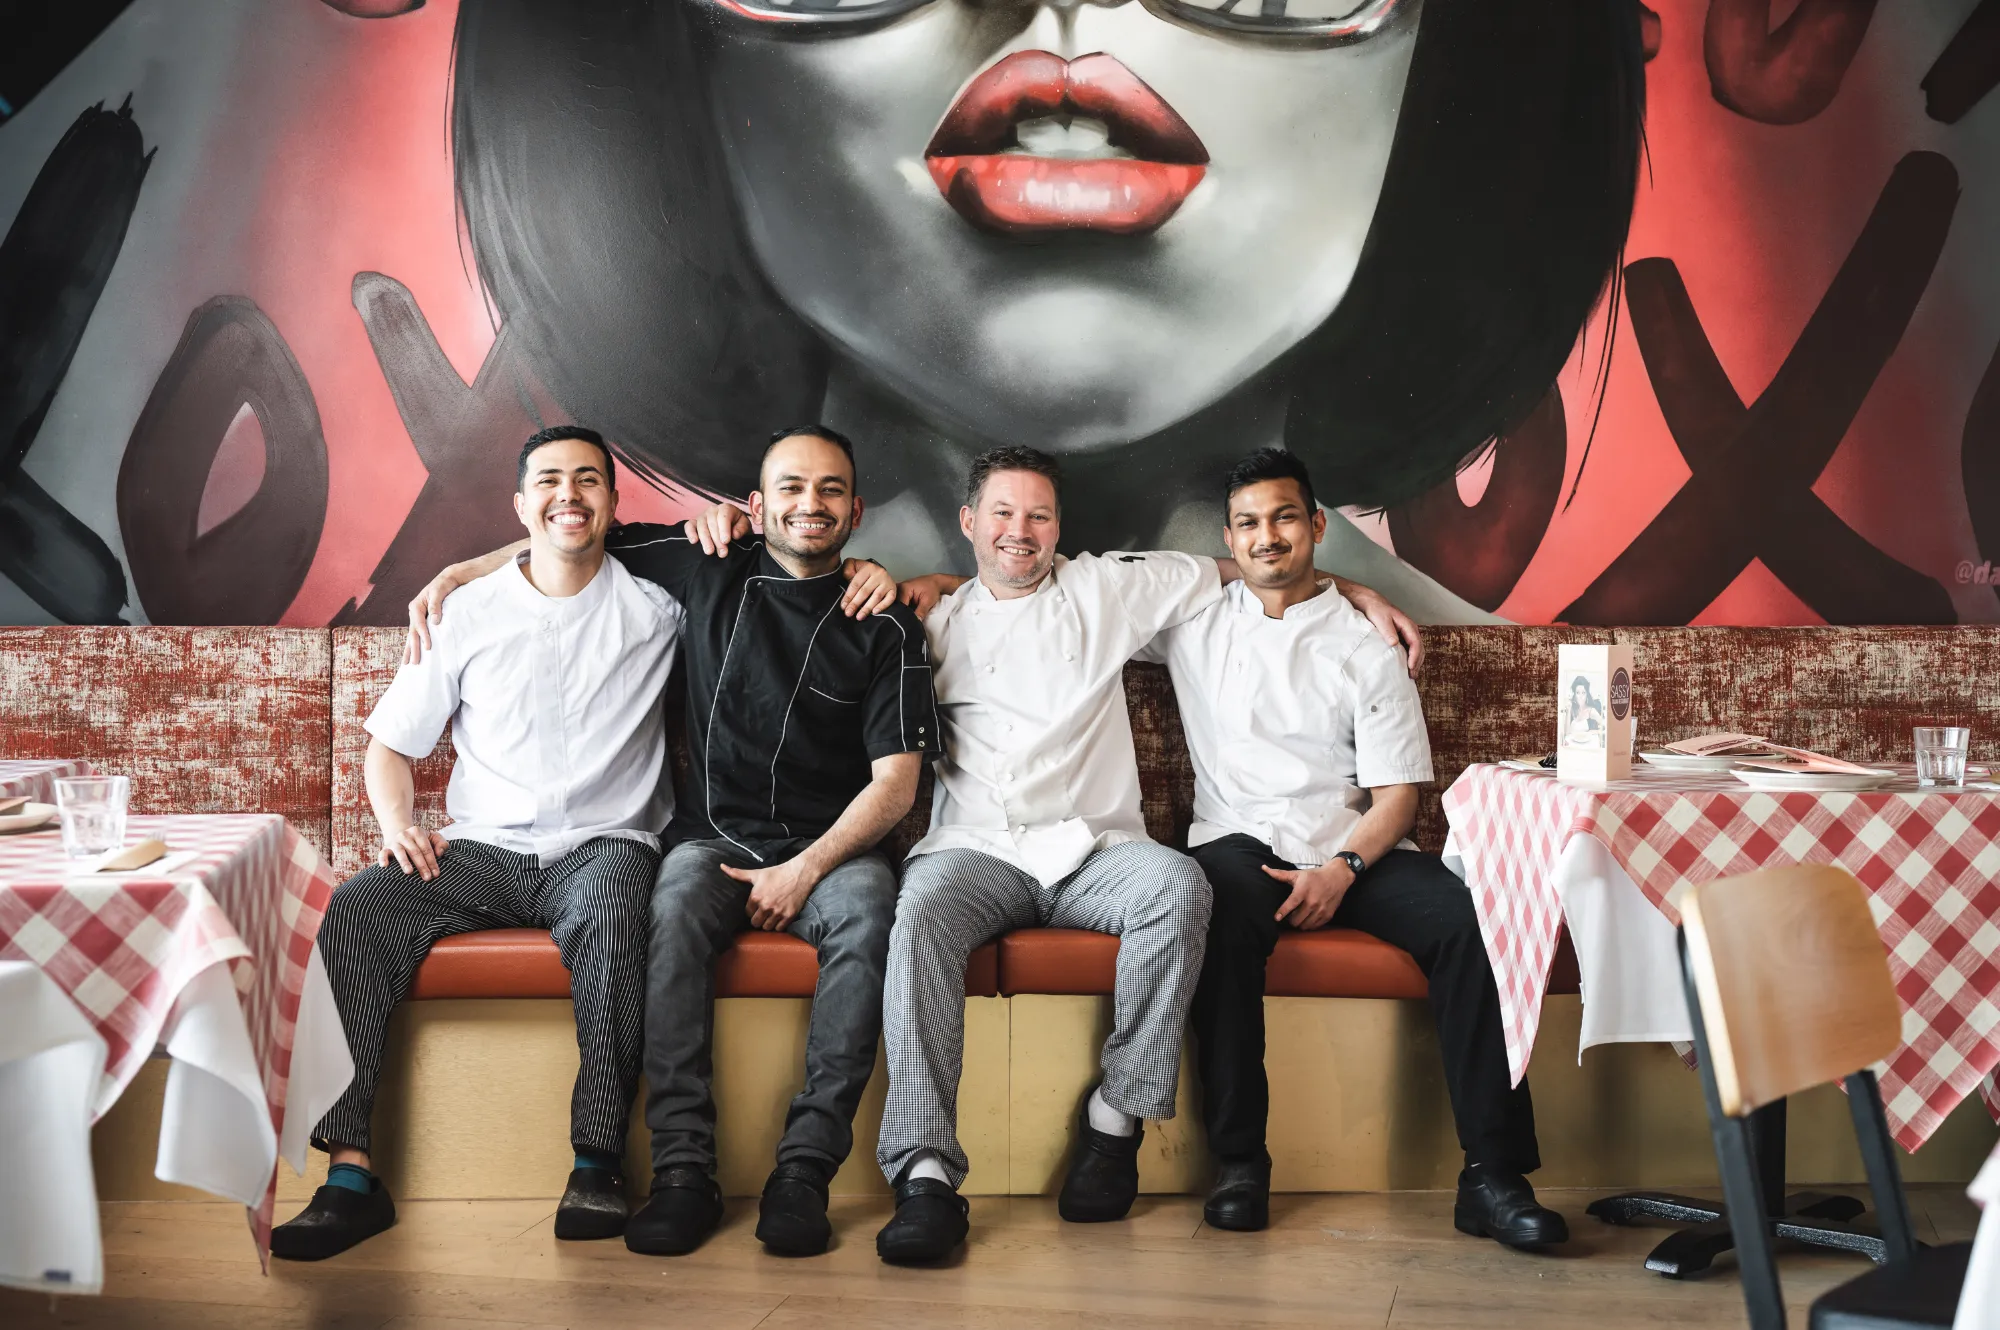 four italian restaurant chefs sat smiling with arms around each other